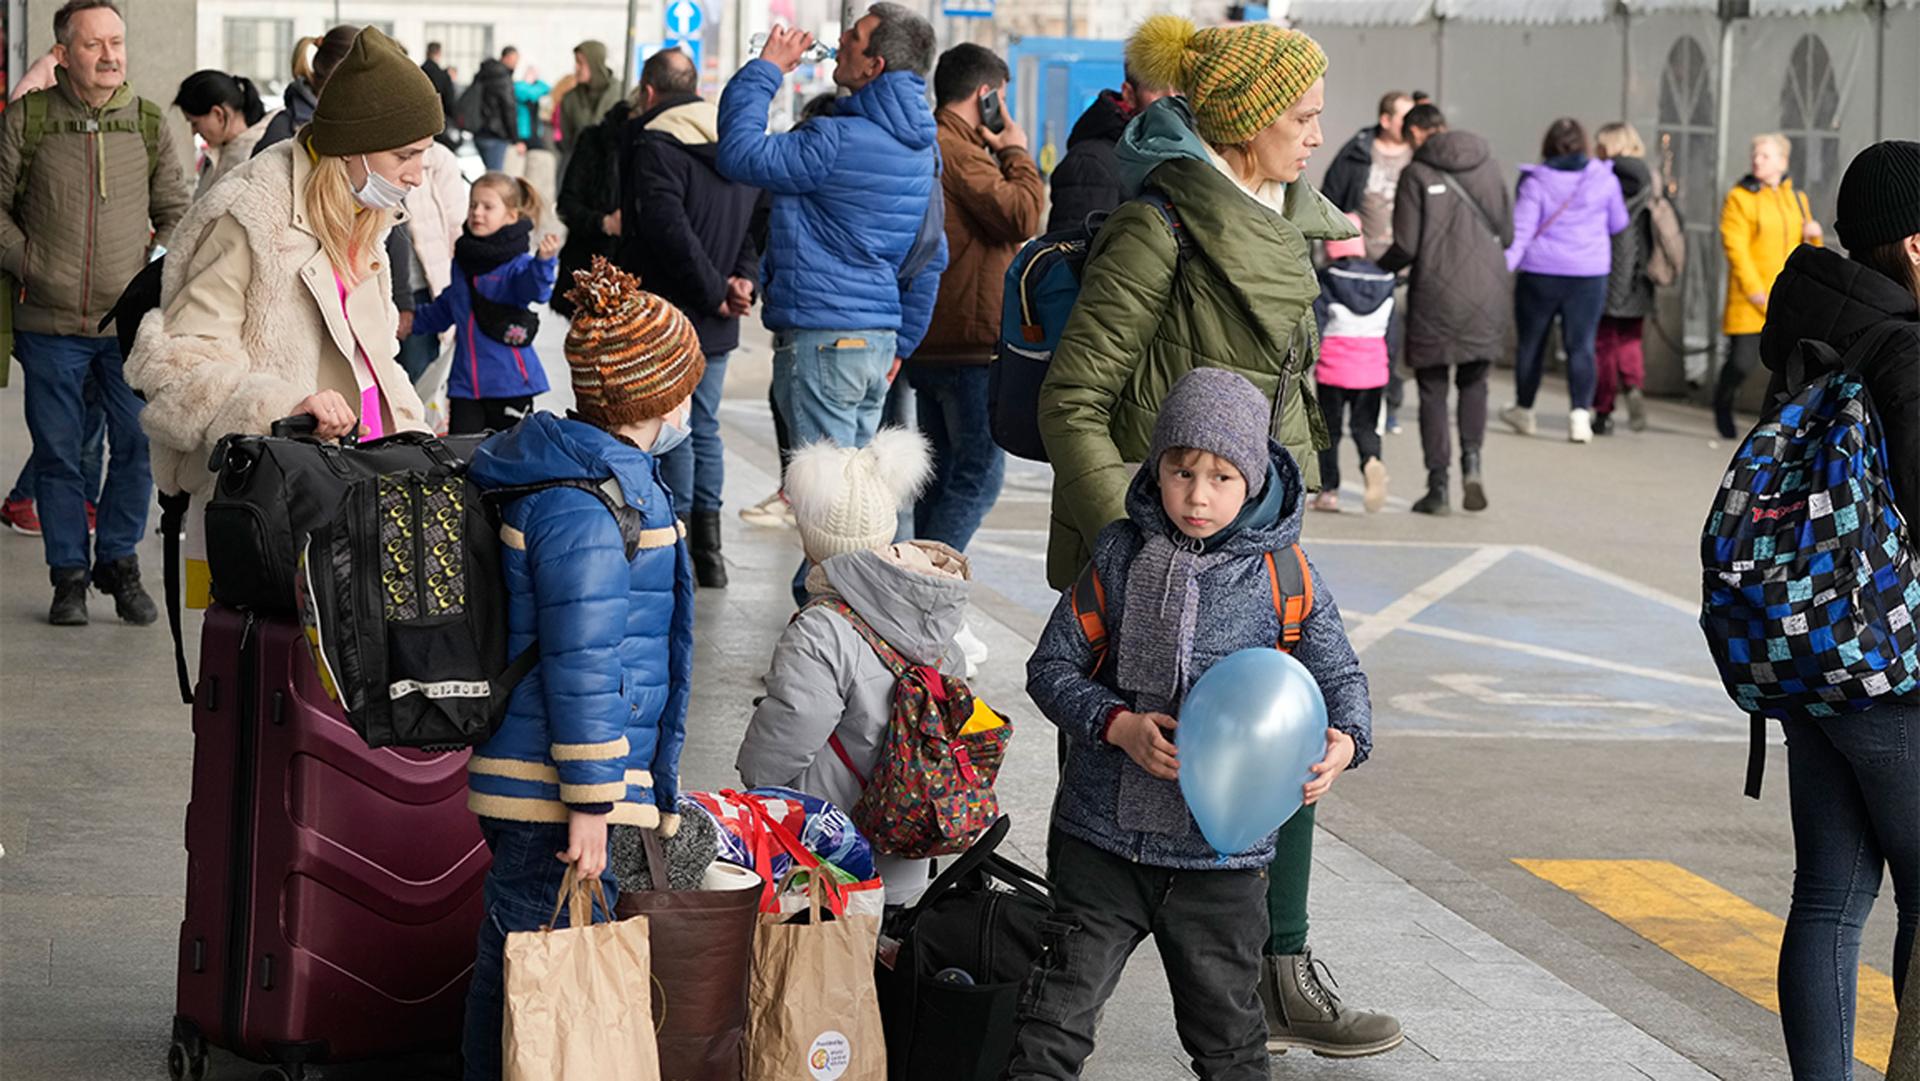 Ukrainian refugees wait for a transport at the central train station in Warsaw, Poland